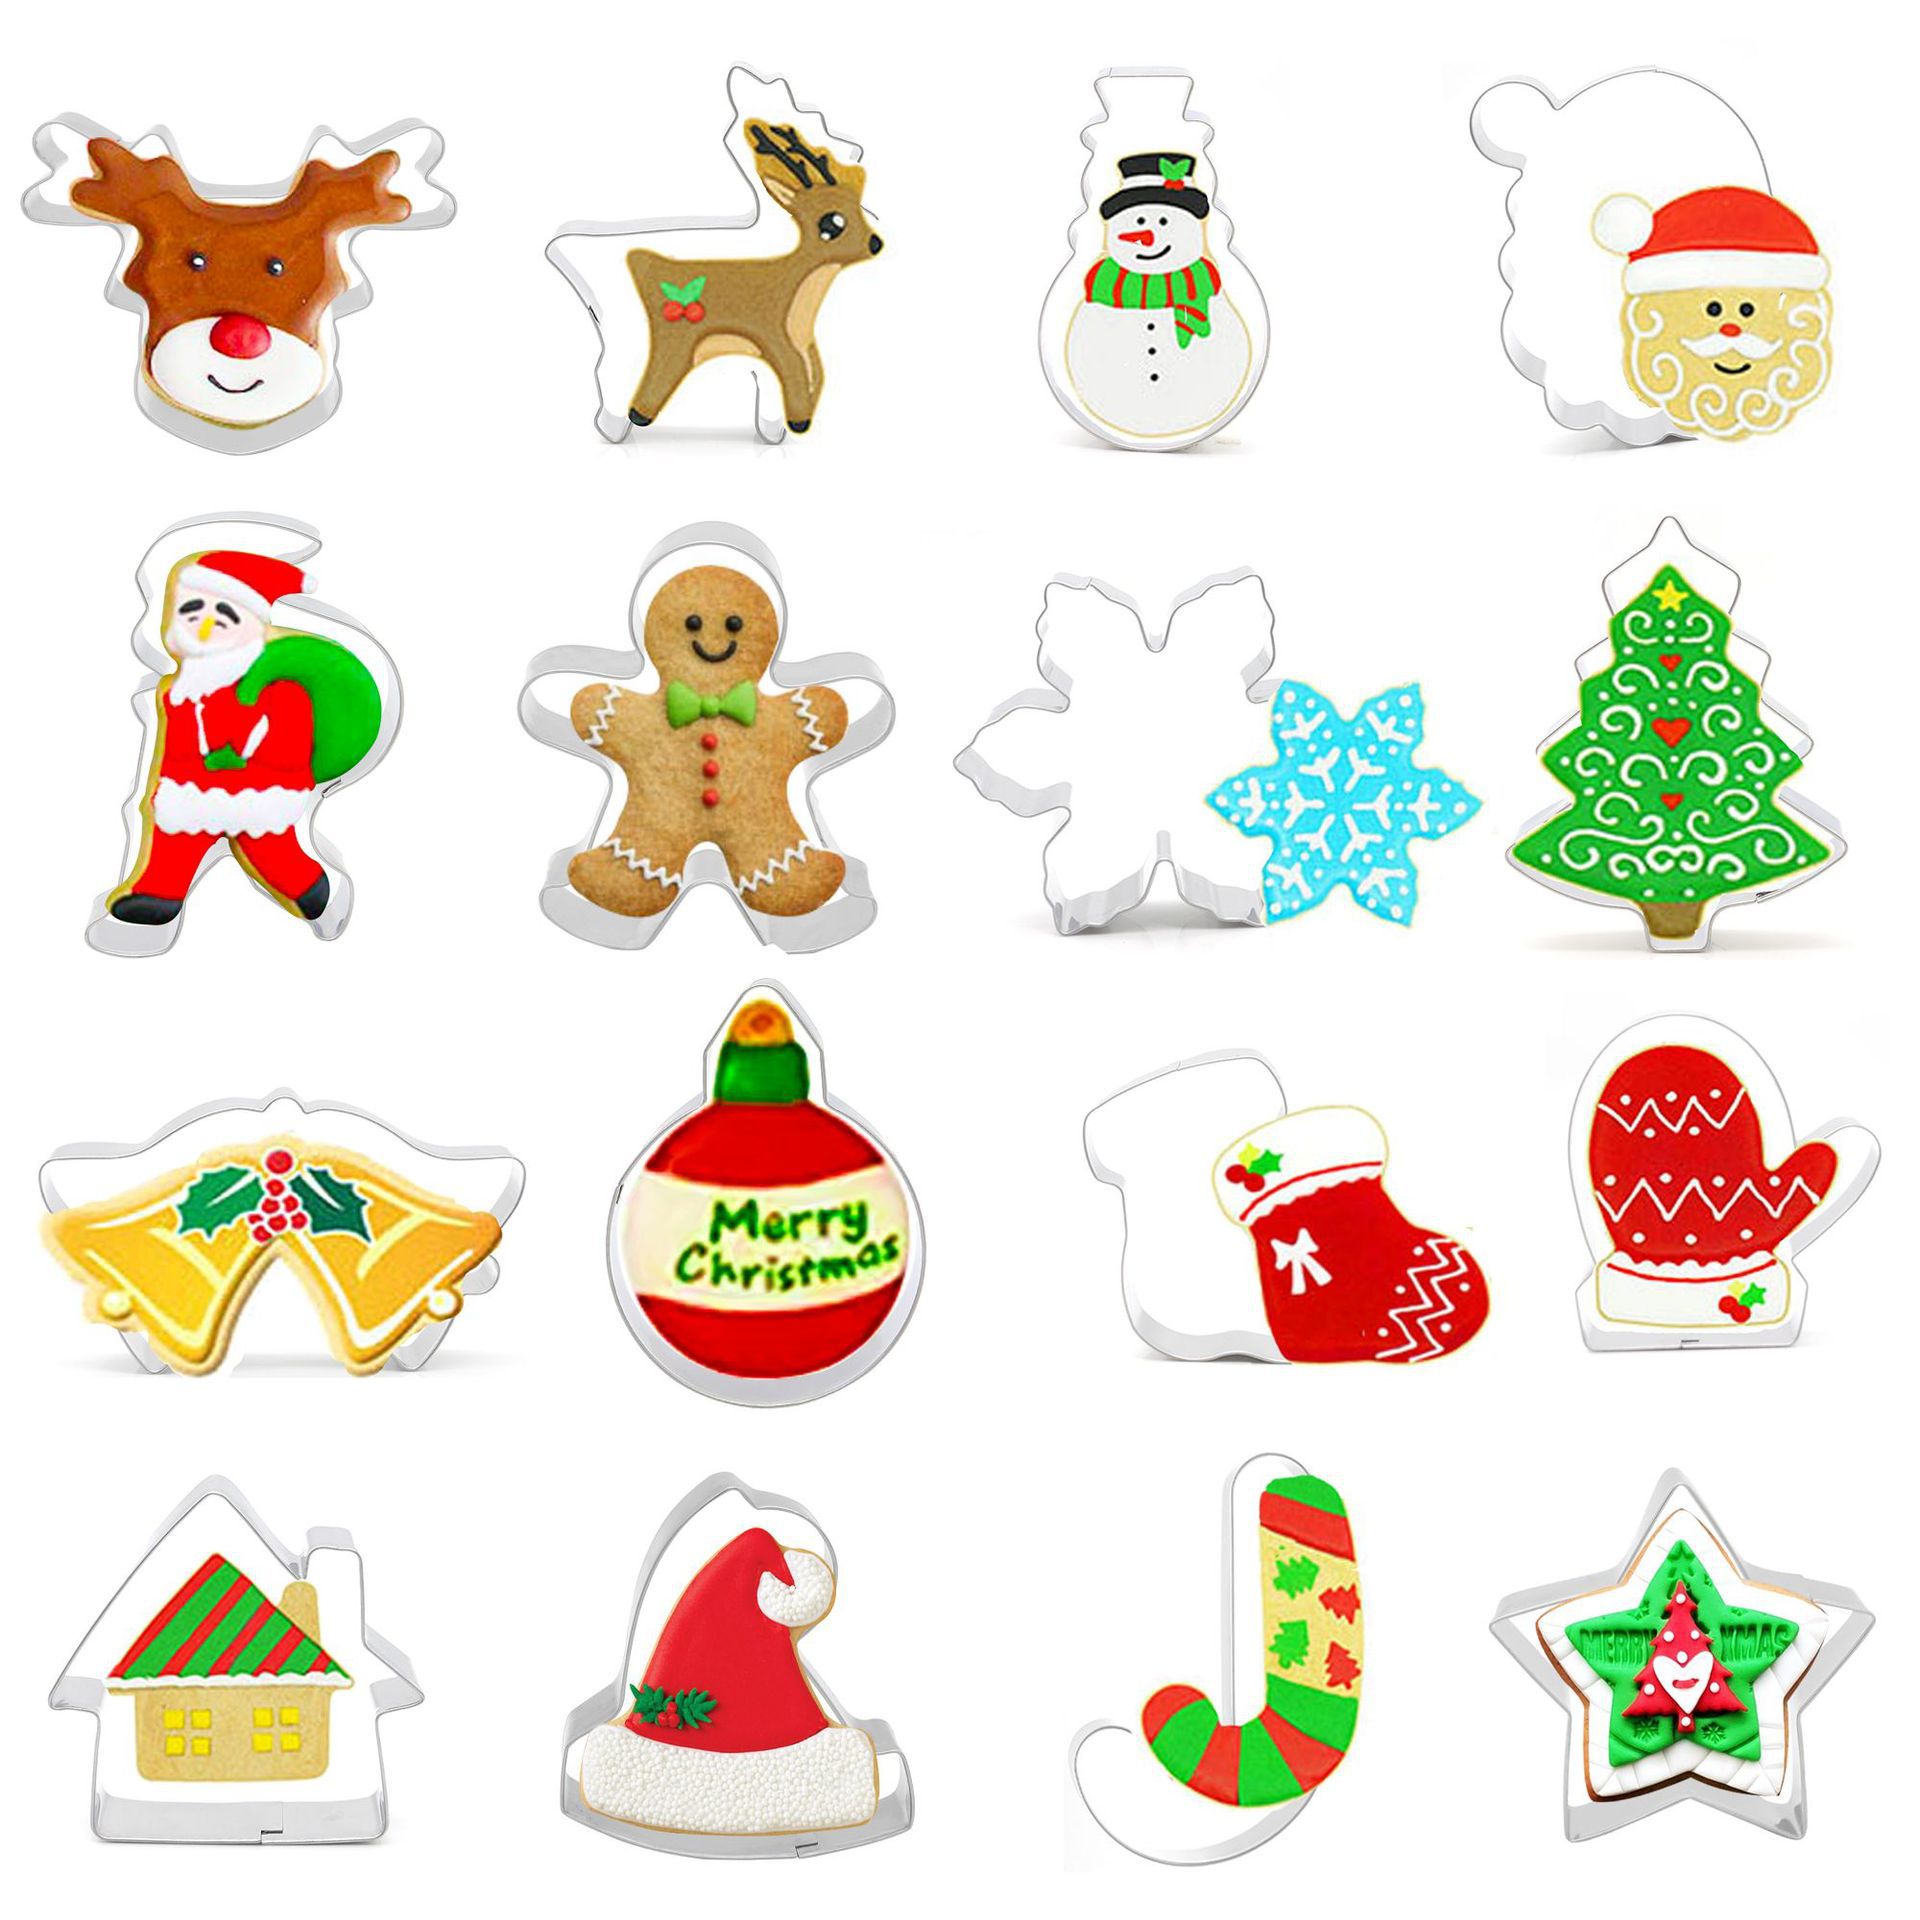 16 Set of Stainless Steel Christmas Biscuit Cutting Suit Gingerbread Man Christmas Tree Candy Santa Claus